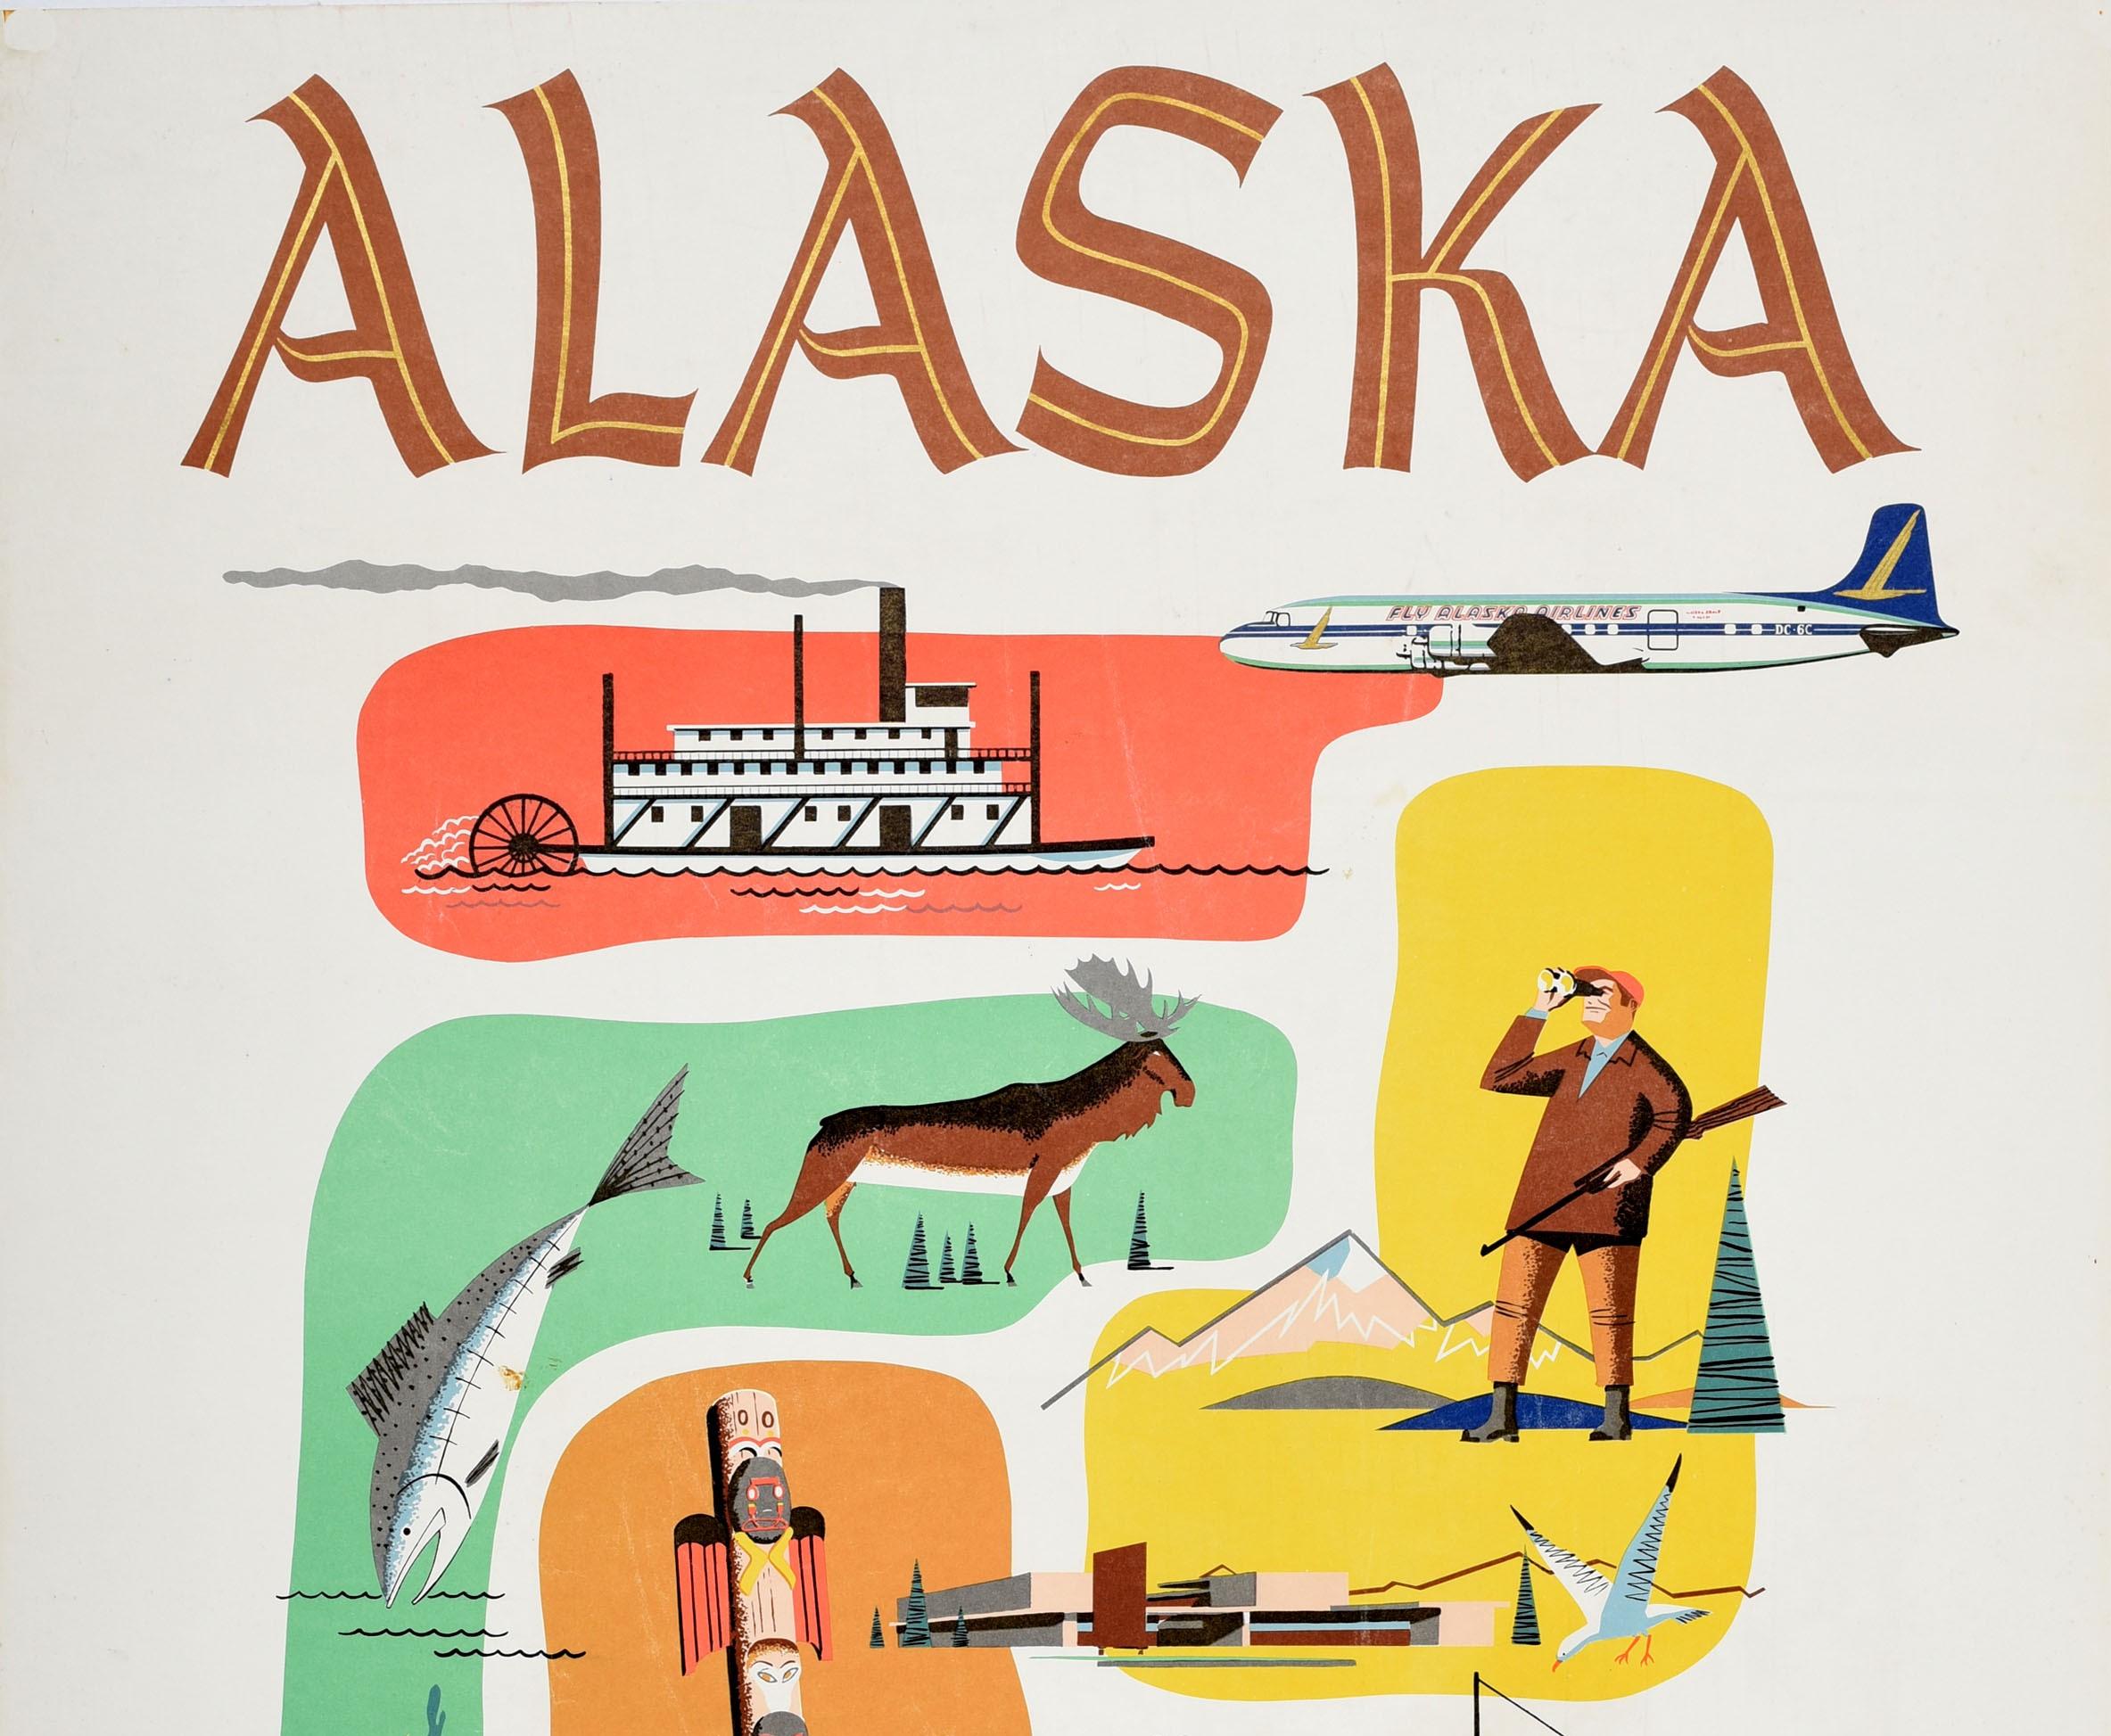 Original vintage travel poster for Alaska The first. The finest. Alaska Airlines Golden Nugget Service featuring a jet plane flying over illustrations on colourful backgrounds including an old style paddle steamship, a moose next to trees and a fish